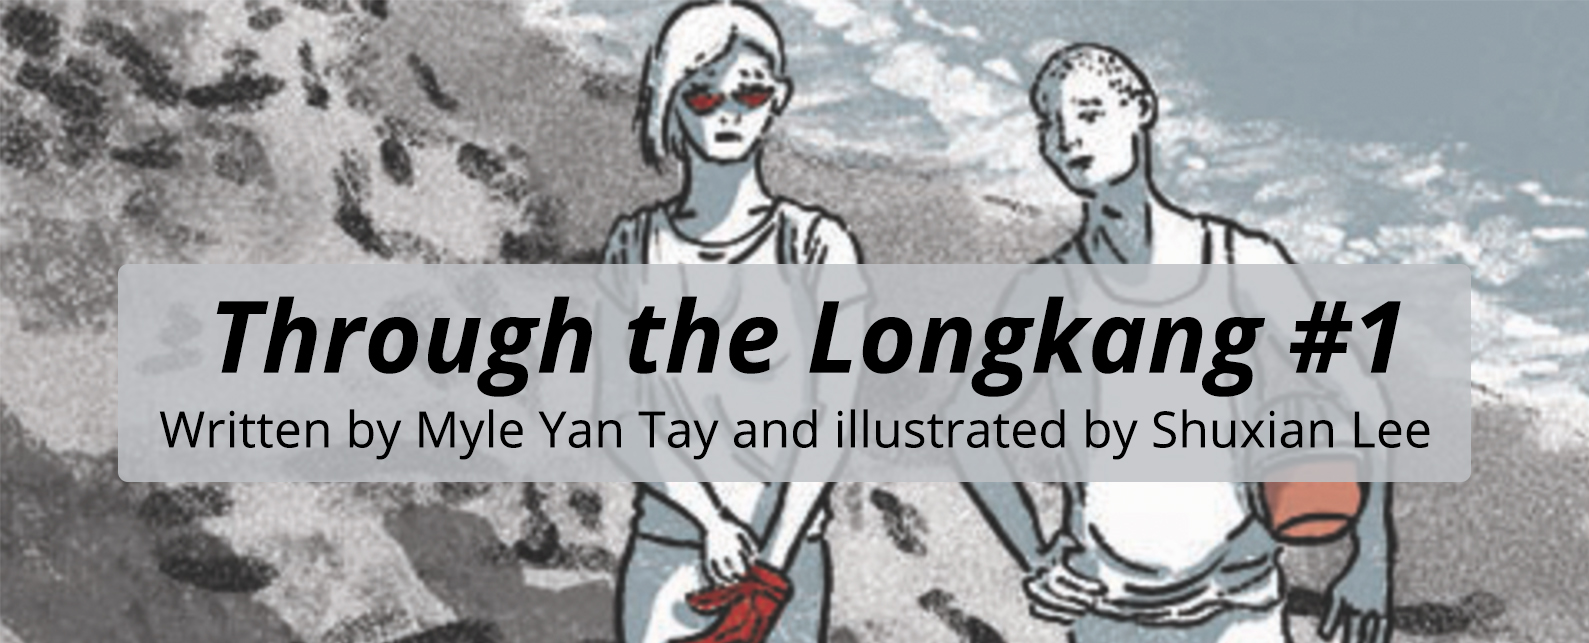 Through the Longkang #1 written by Myle Yan Tay and illustrated by Shuxian Lee